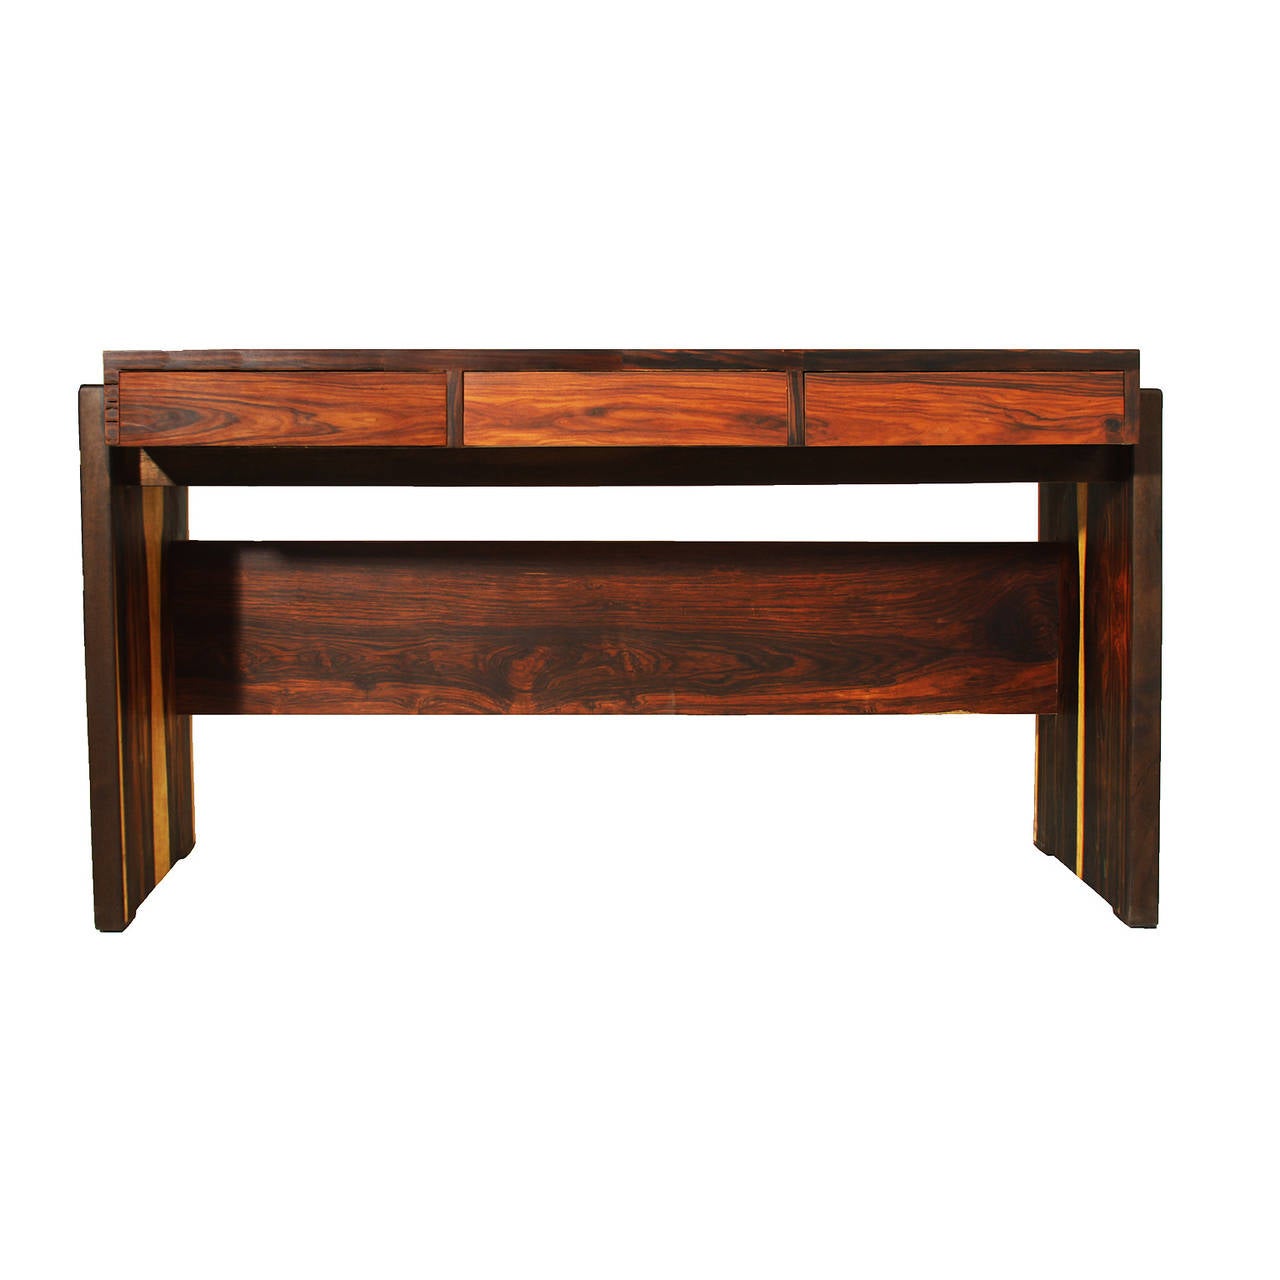 A stunning vintage rosewood desk by Joaquim Tenreiro. This piece has been finished in a rich hand rubbed oil finish and the wood is deep and rich as seen in photos.

 